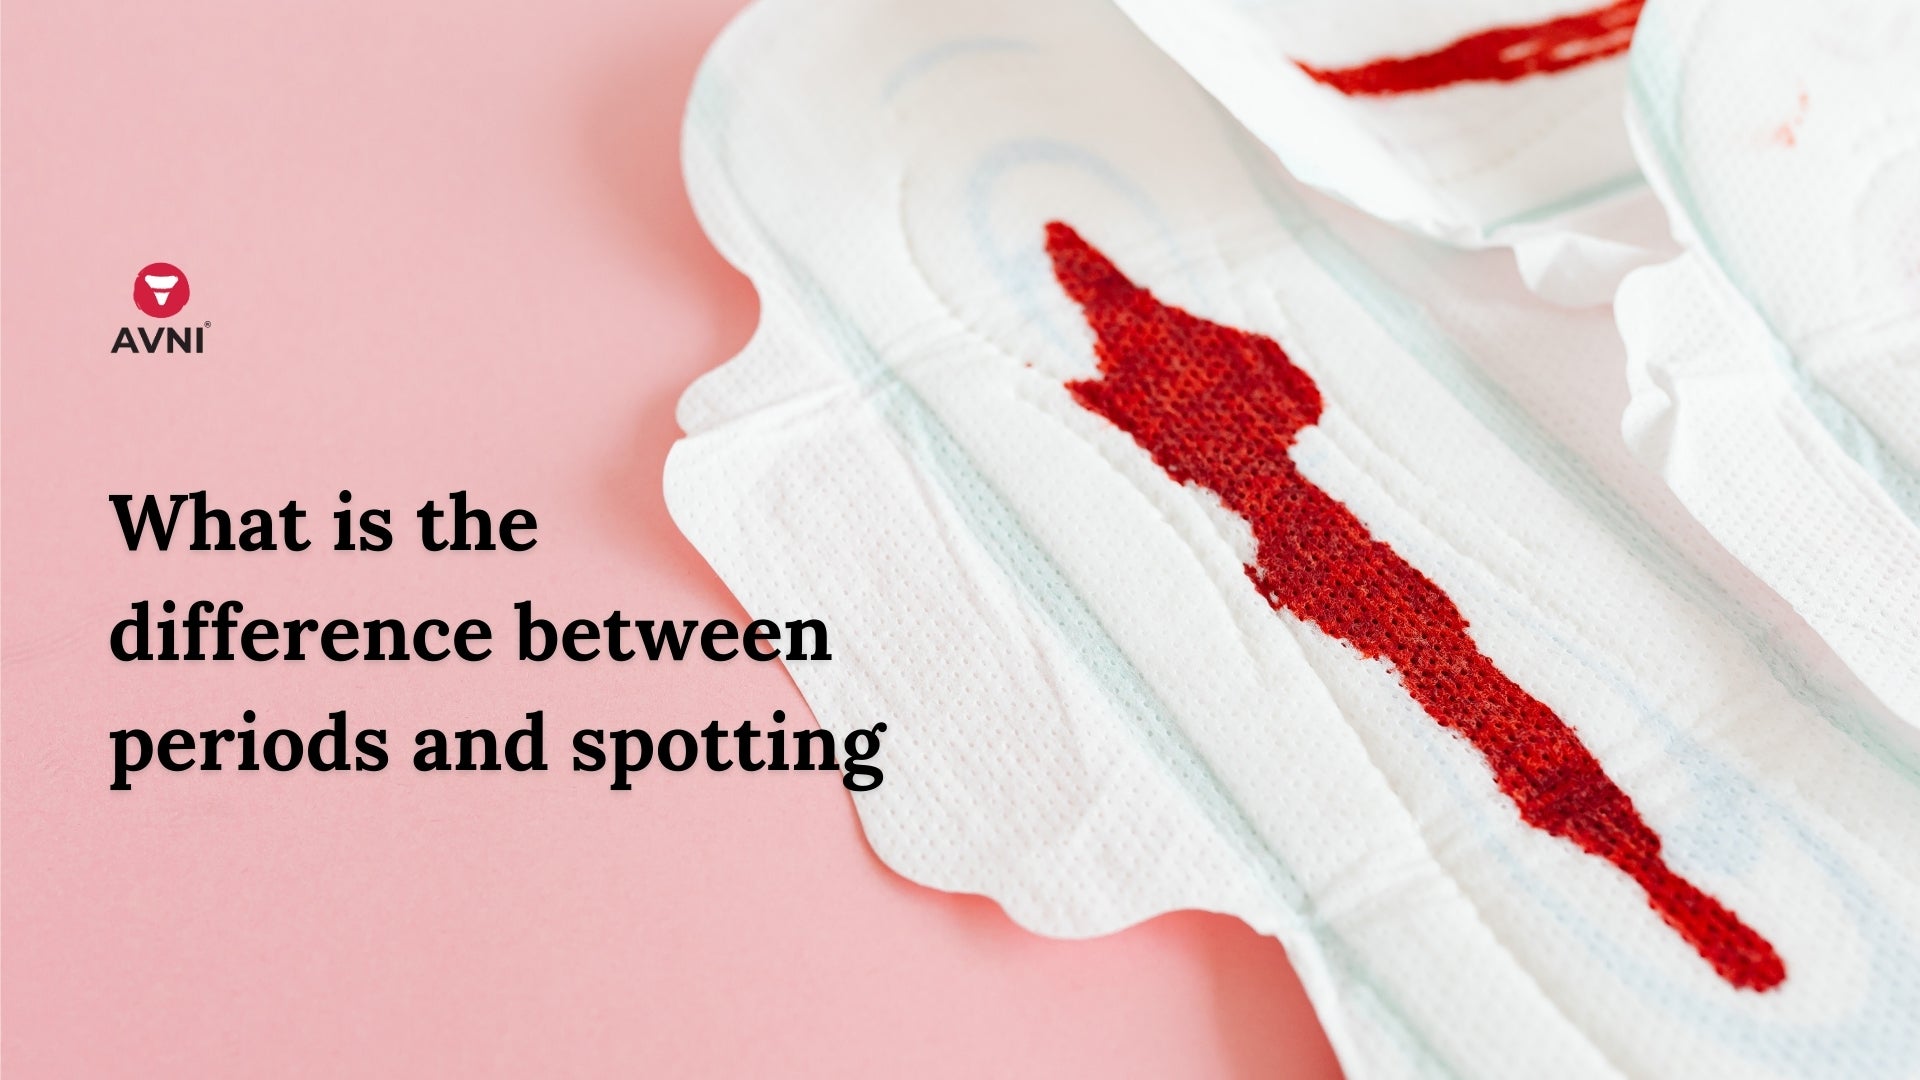 Implantation Bleeding vs. Period: How to Tell the Difference